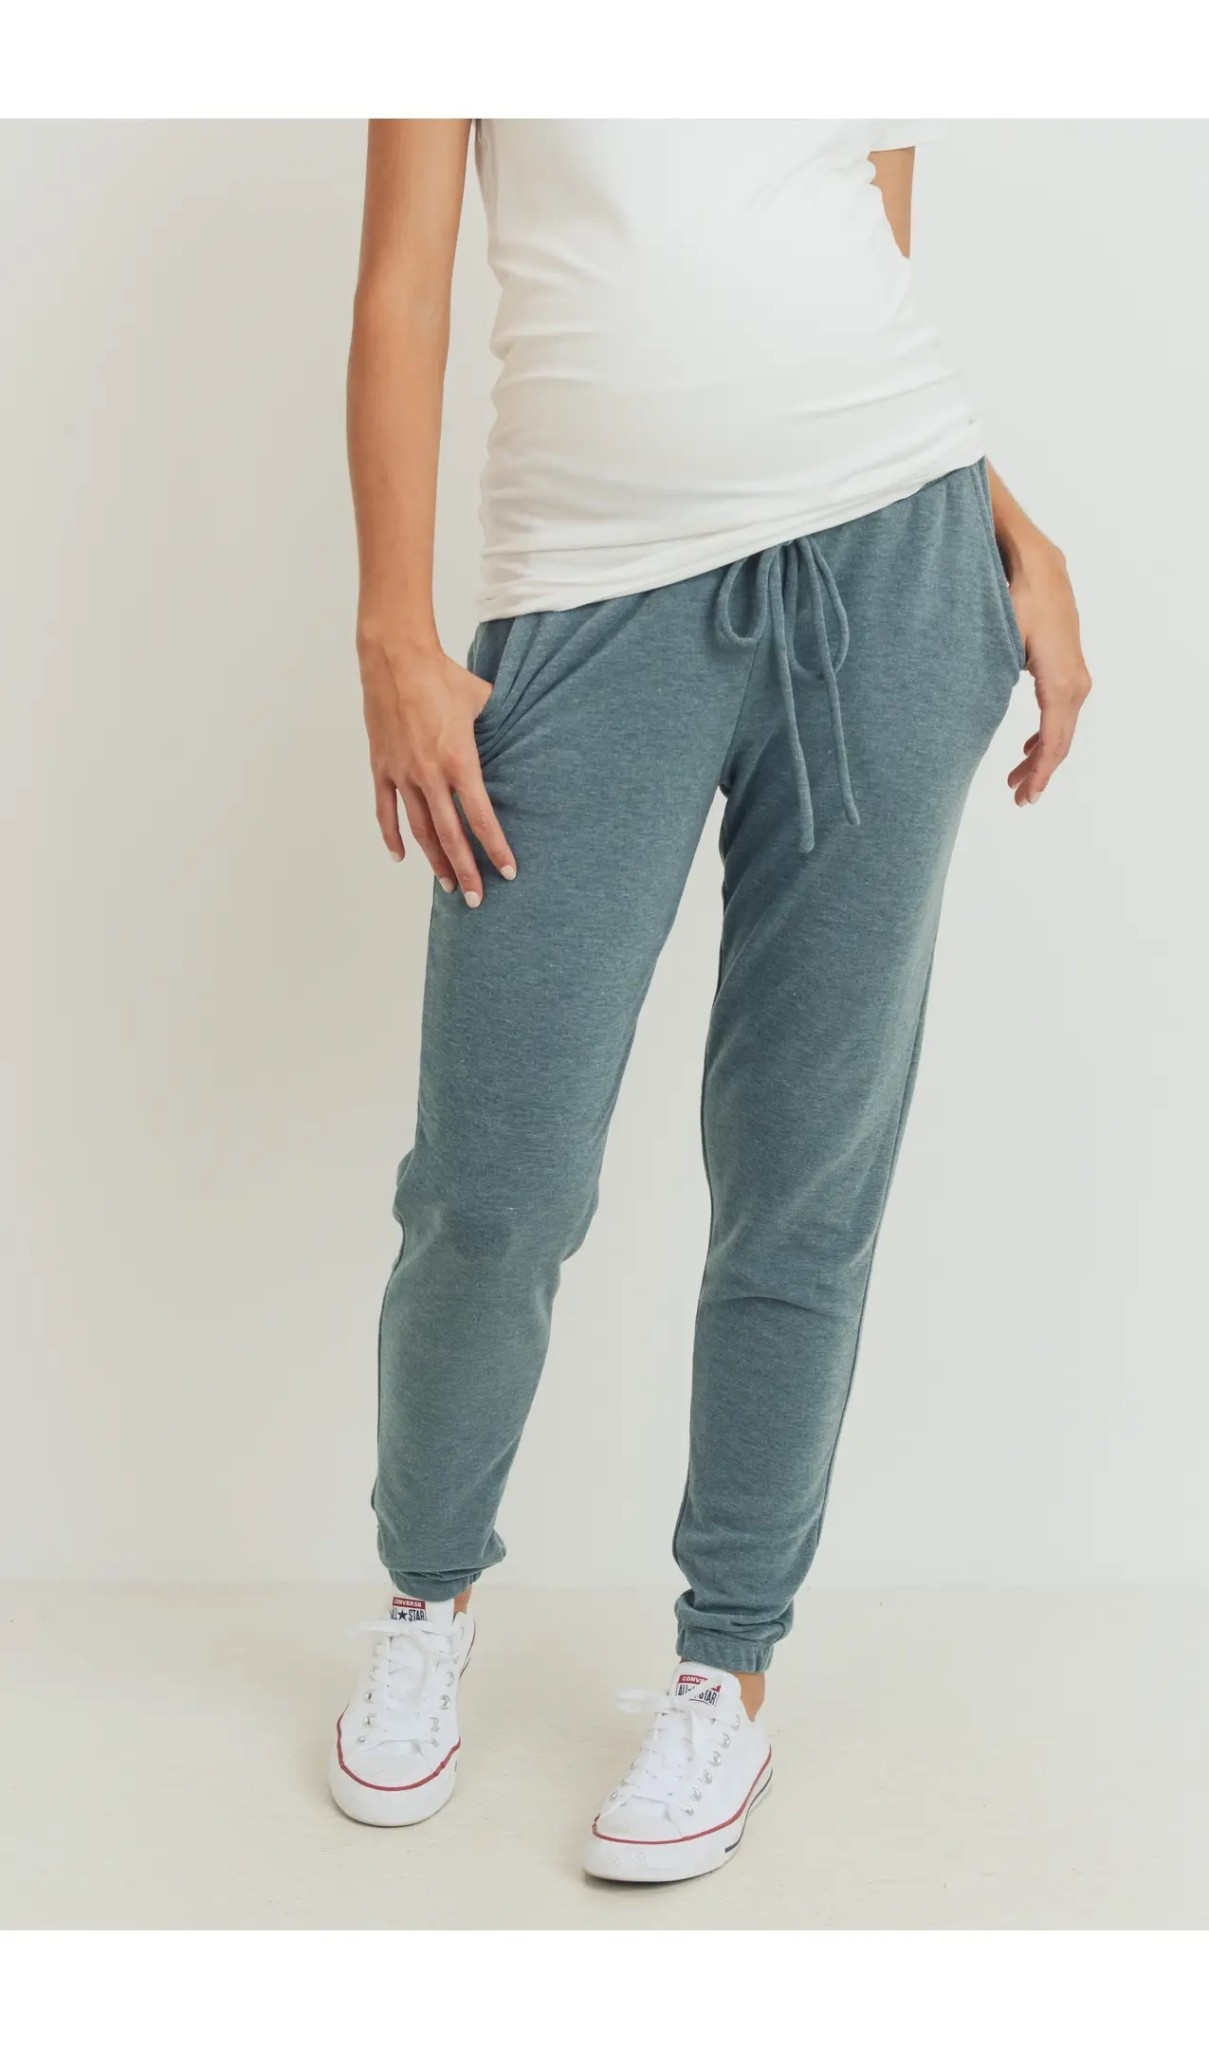 Maternity Brushed Terry Teal Sweatpant